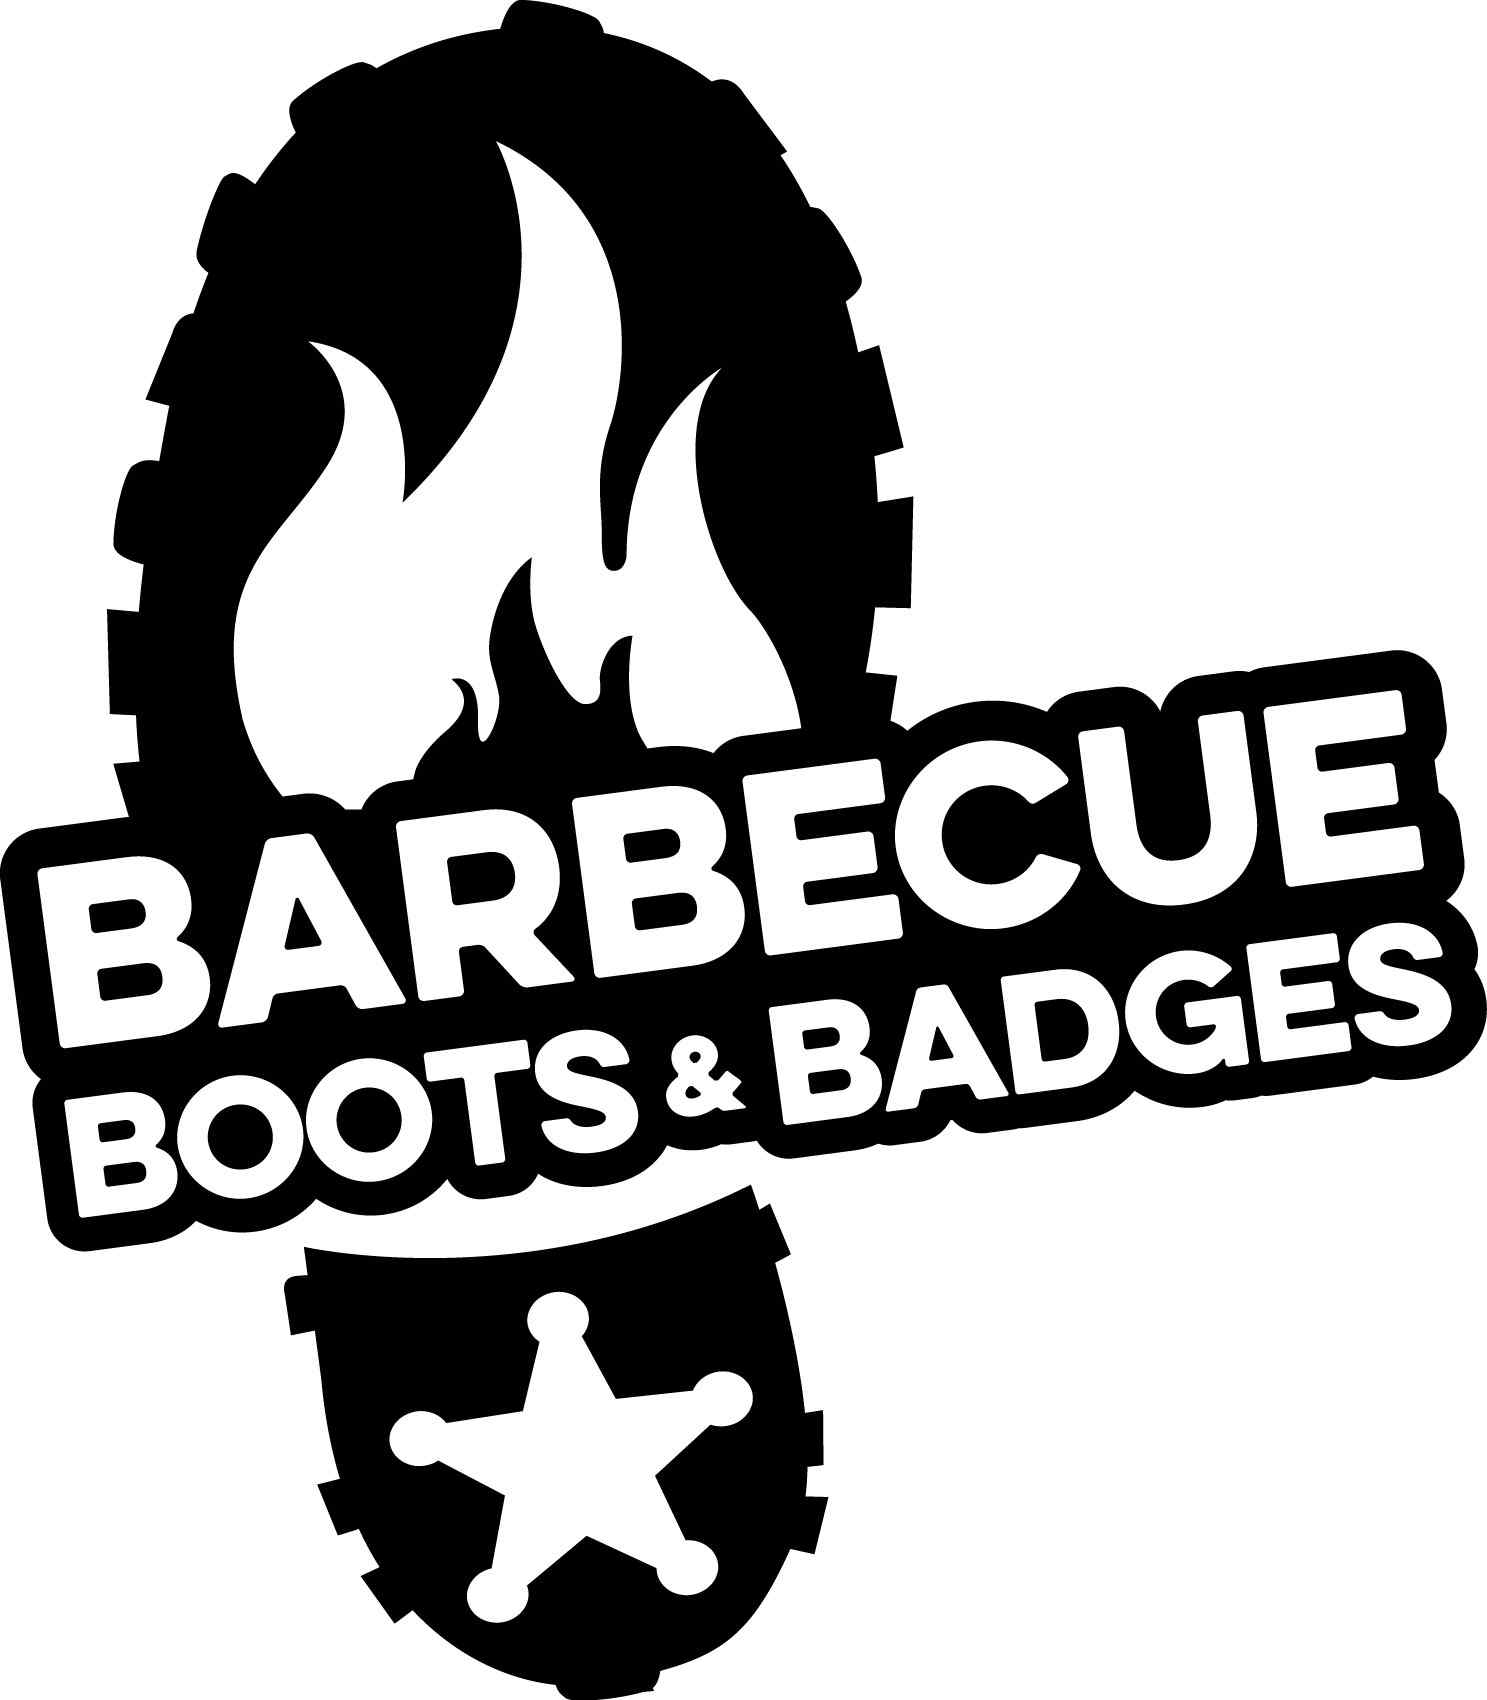  ‘Battle of the Pitmasters’ Hosted by Barbecue, Boots & Badges Features Exciting Raffle Prizes, VIP Silent Auction and Free Barbecue for a Year